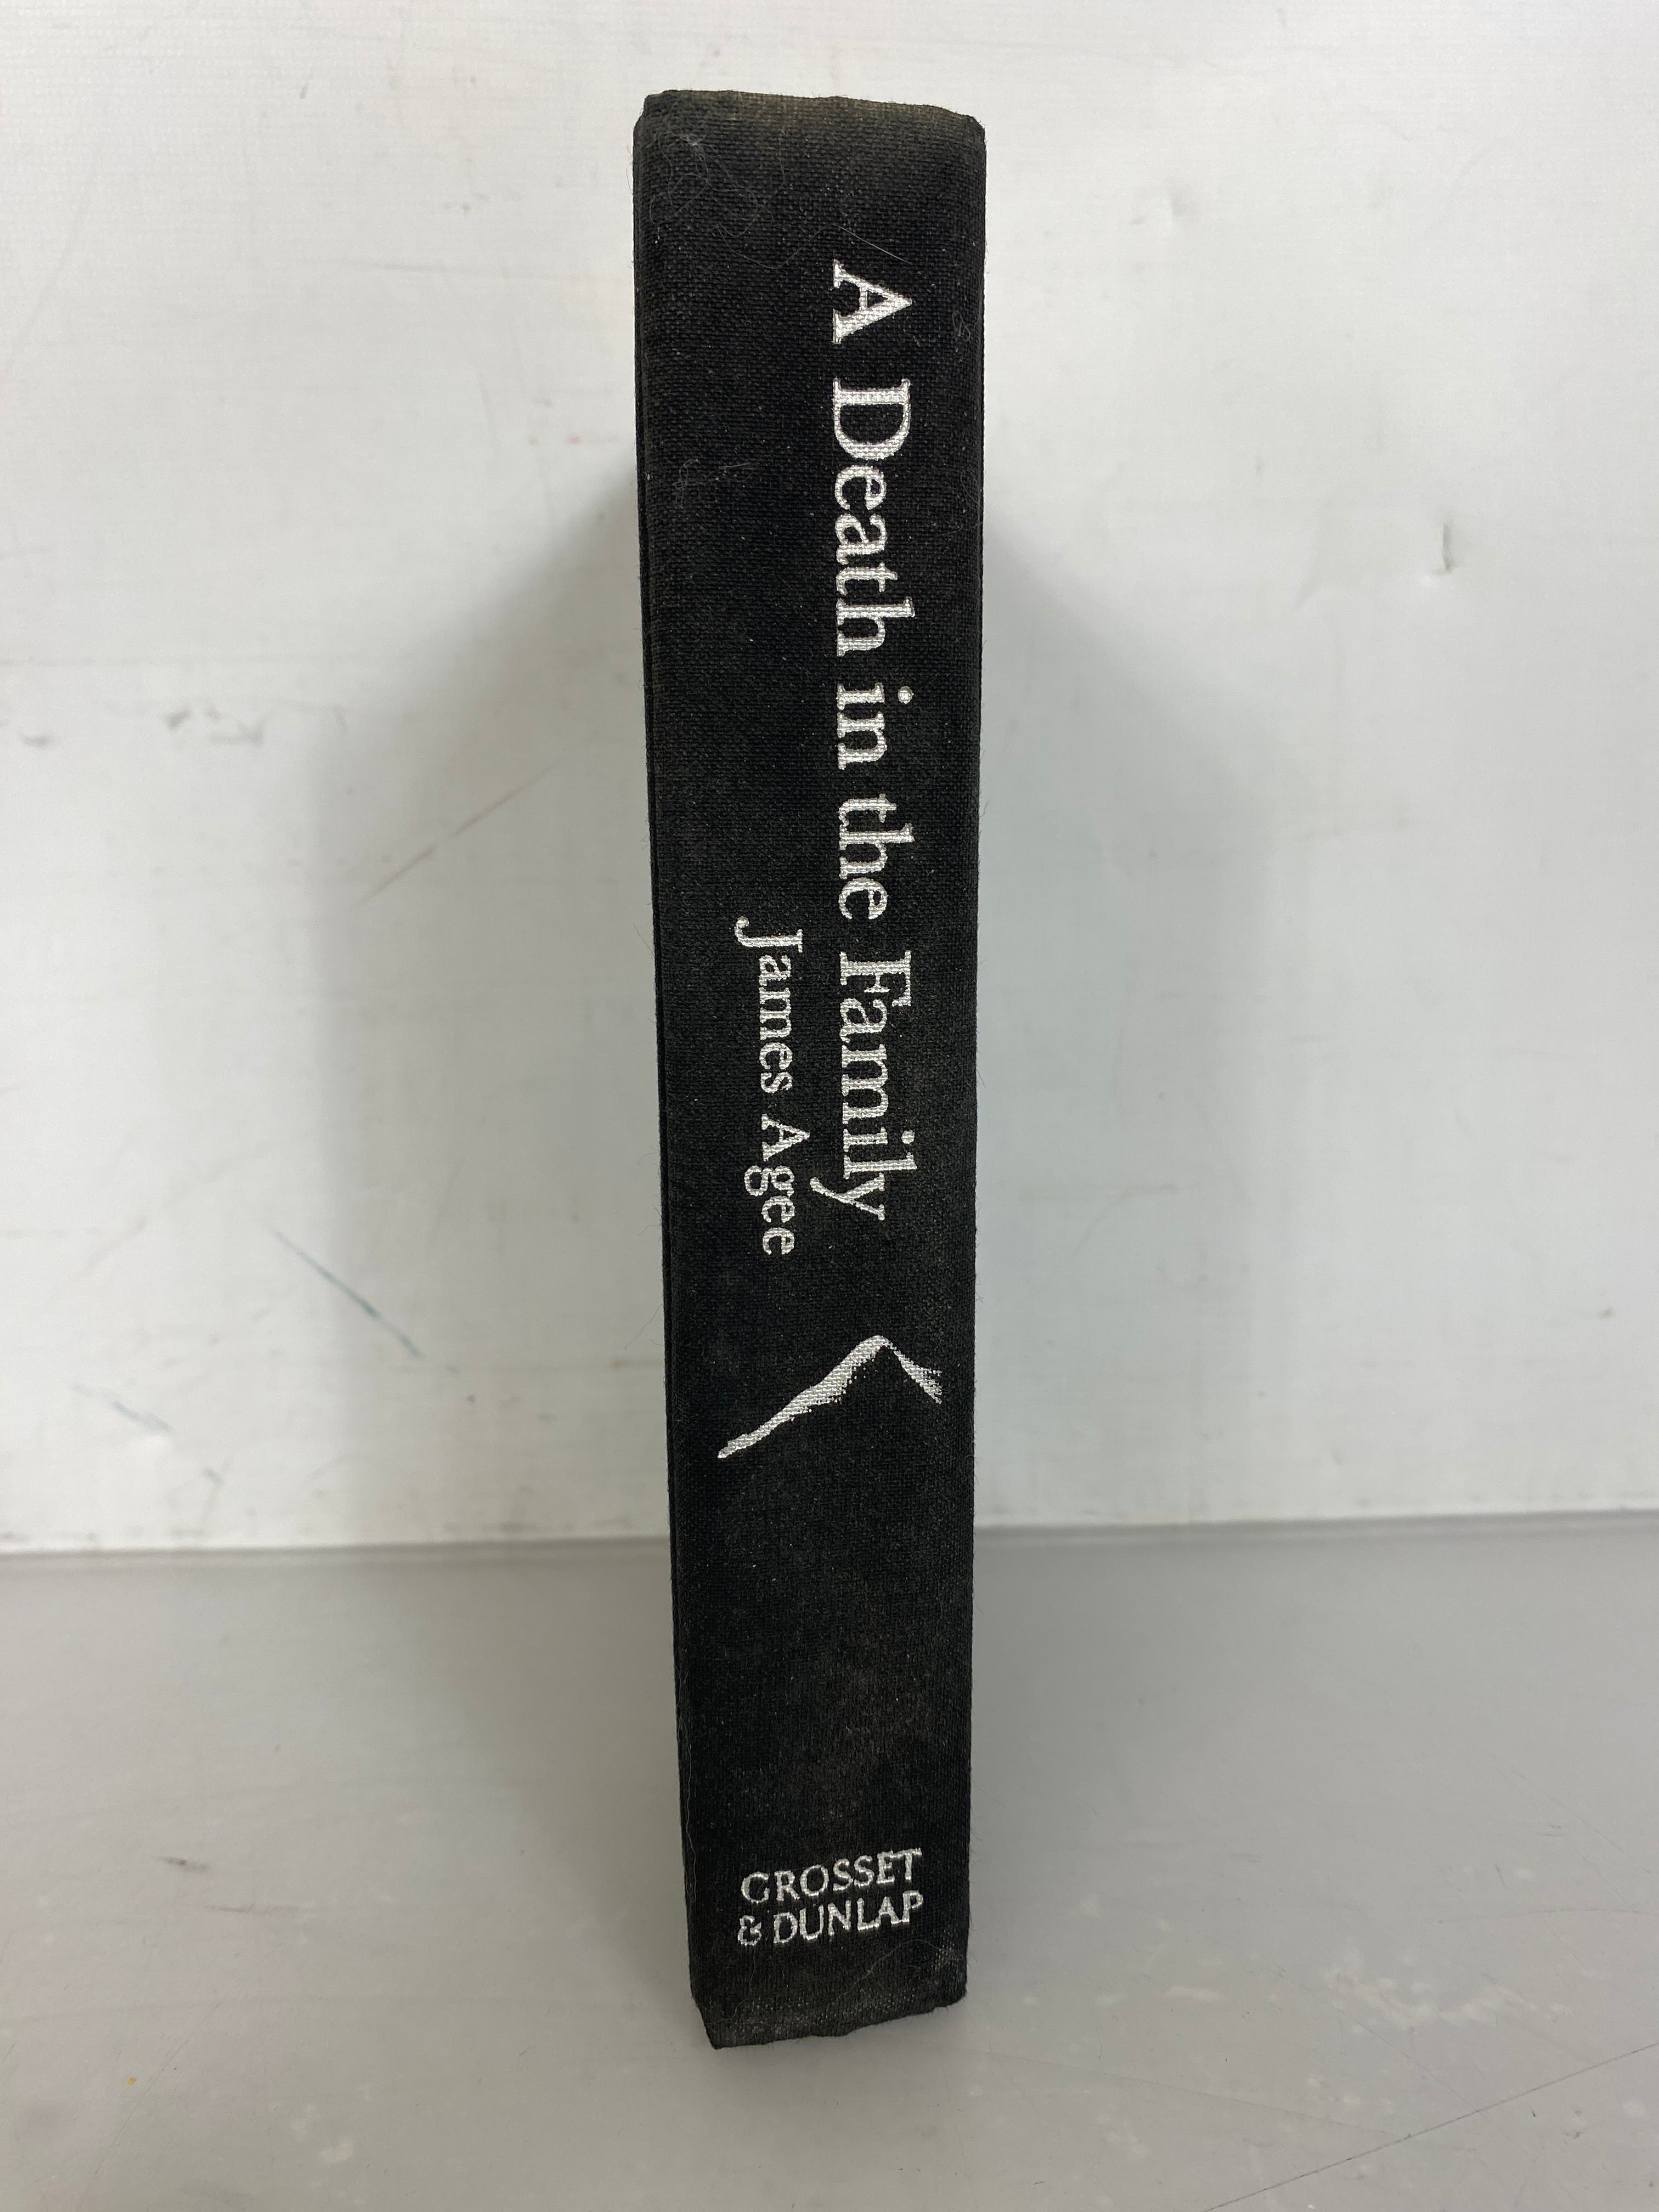 A Death in the Family by James Agee 1967 Grosset & Dunlap Edition HC